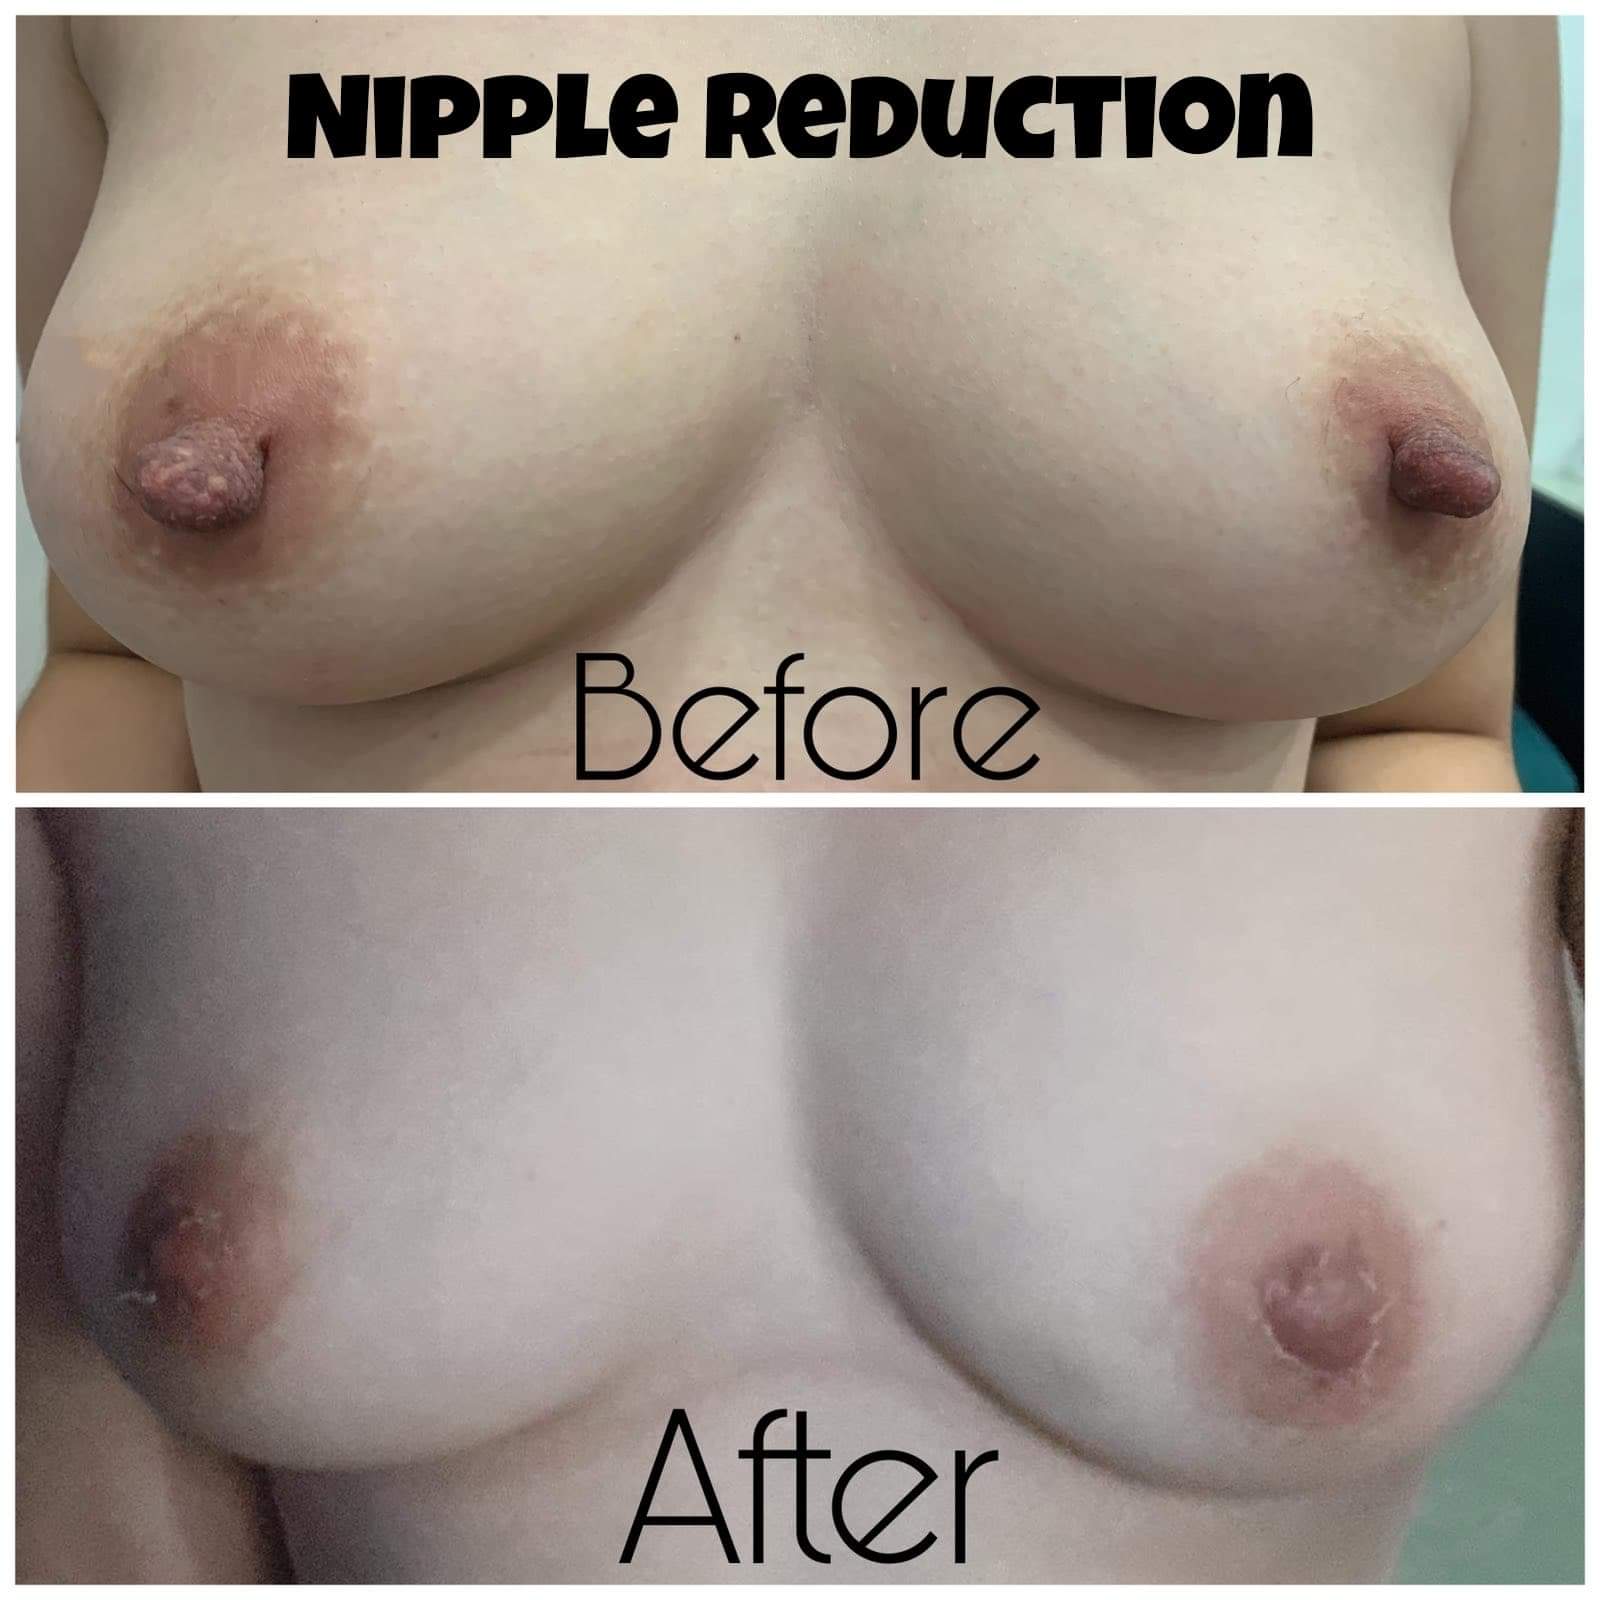 Nipple Reduction (Before and After)